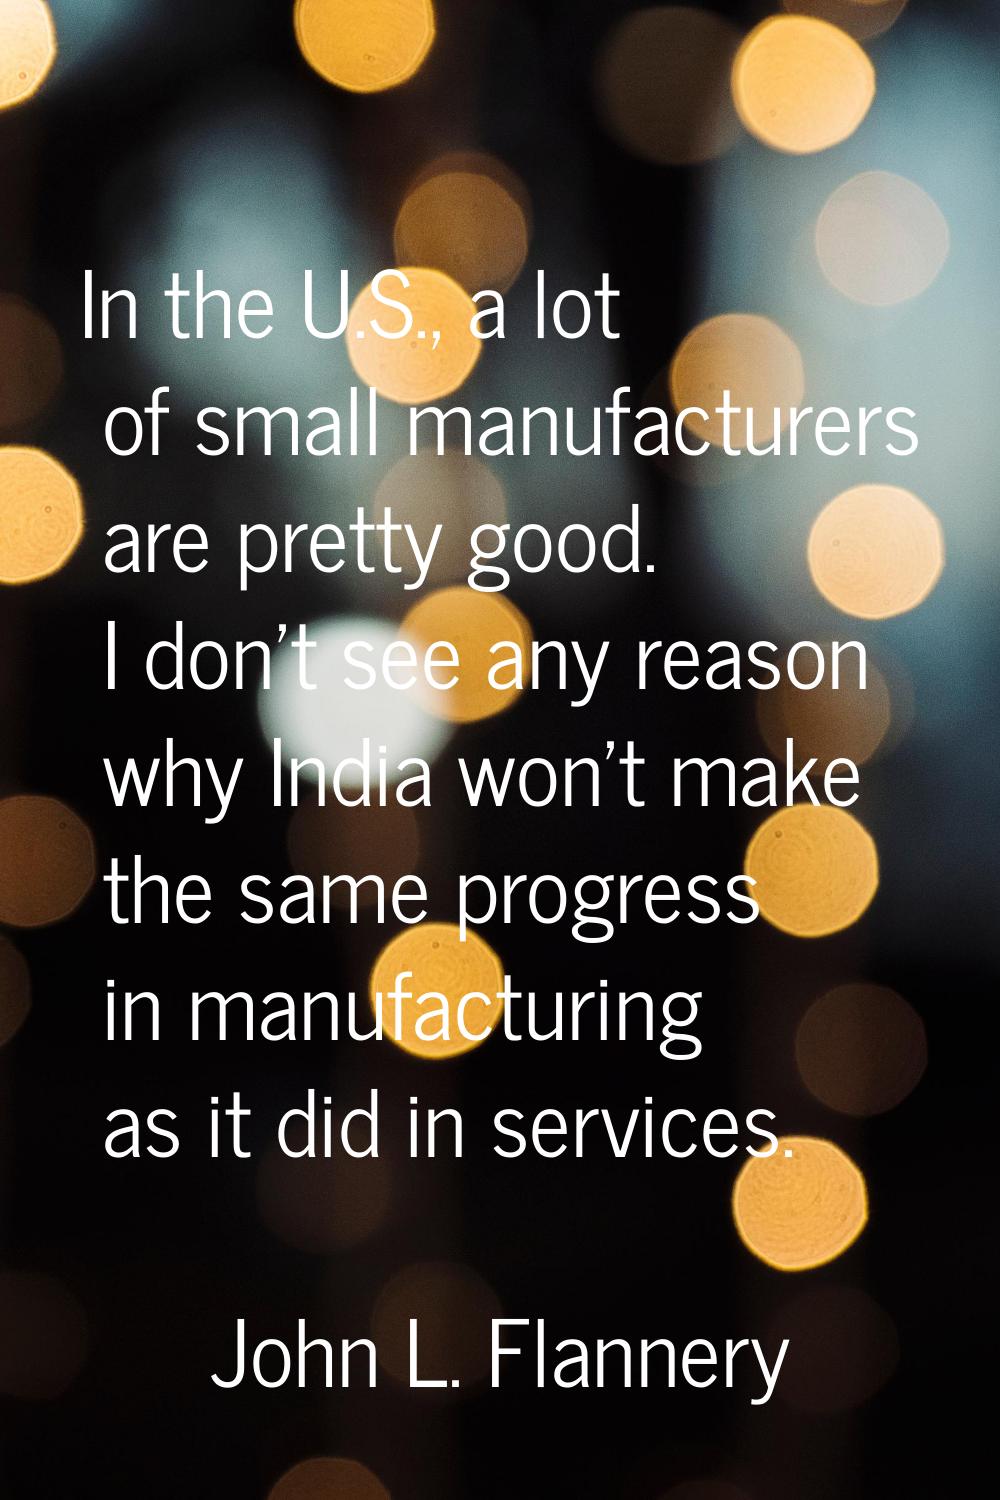 In the U.S., a lot of small manufacturers are pretty good. I don't see any reason why India won't m